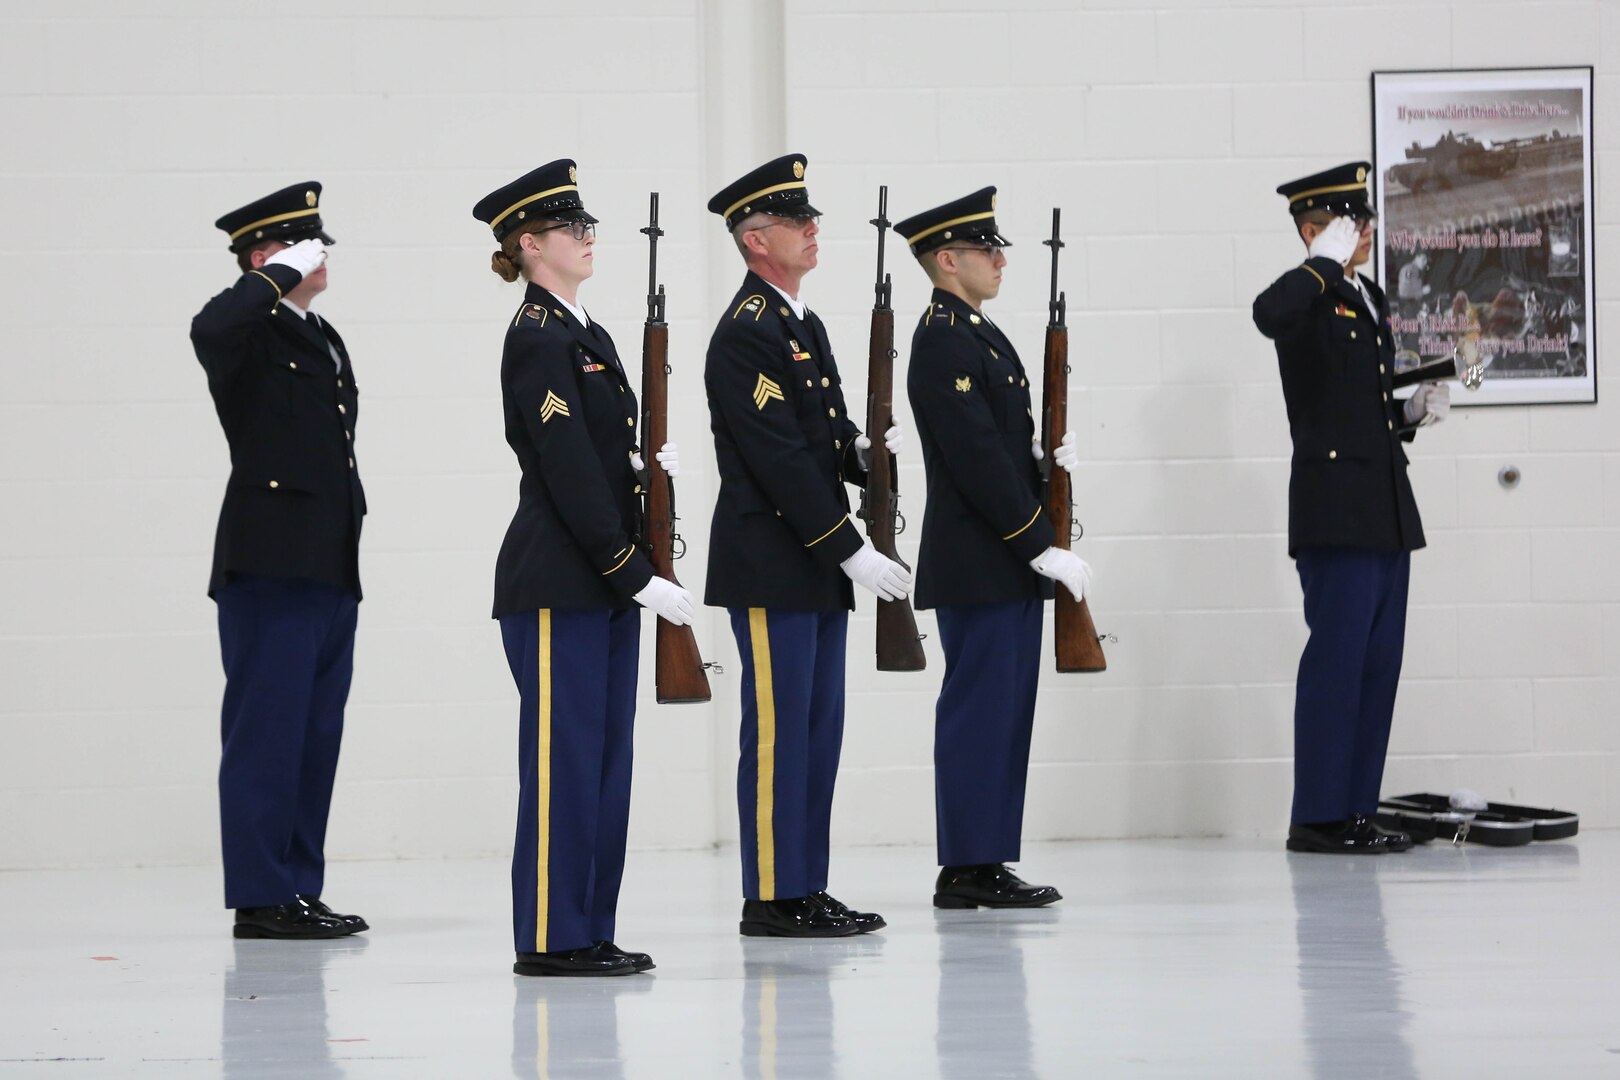 Group of dress uniformed Soldiers (two rendering hand salutes, three rendering rifle salutes)